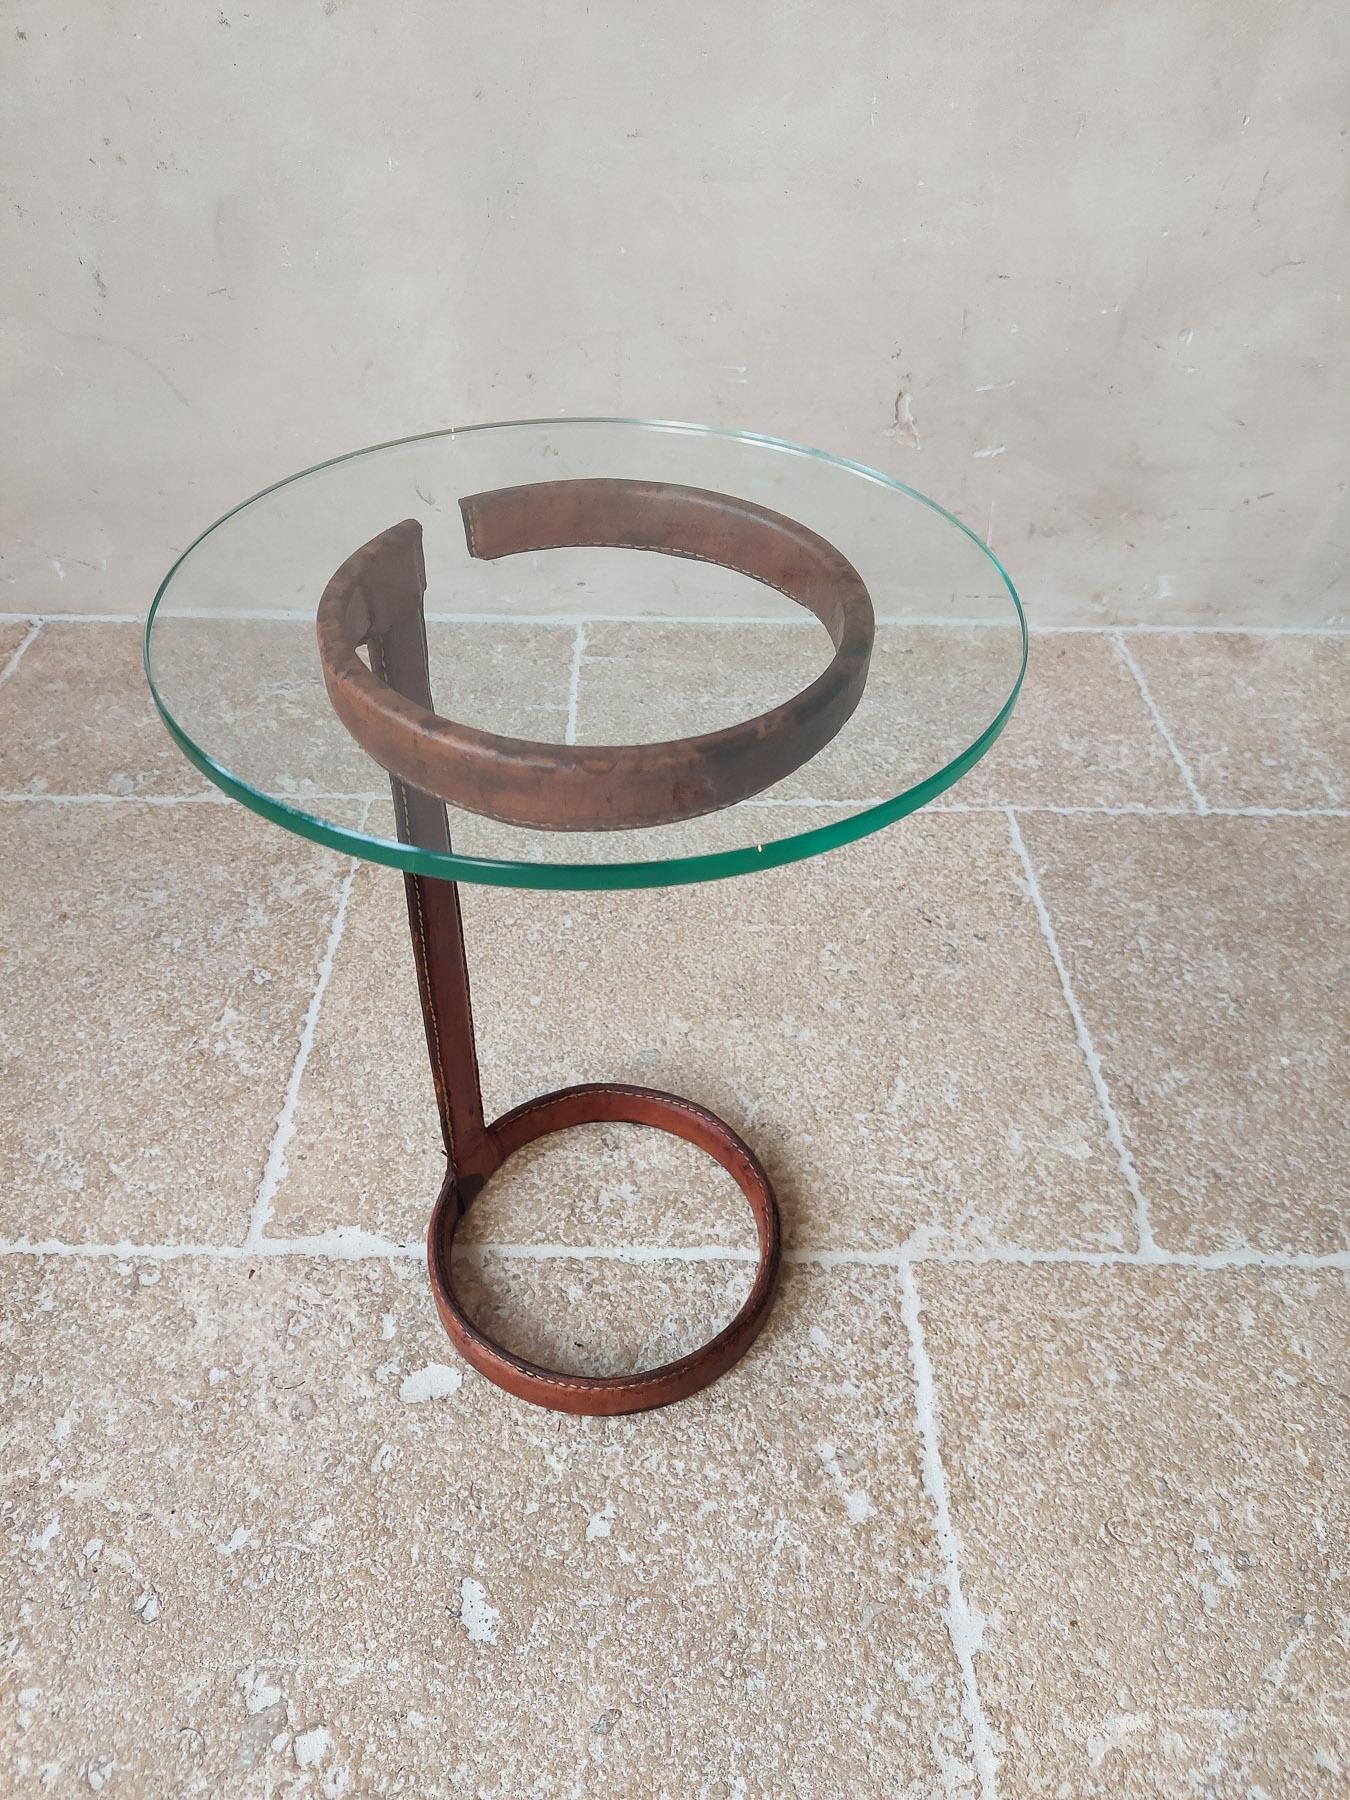 Vintage Jaques Adnet side table in leather and glass. Round table with cognac-coloured leather foot (iron covered with leather), and 1 cm thick polished glass top.

h 41 x diameter 30 cm
diameter foot 19 cm